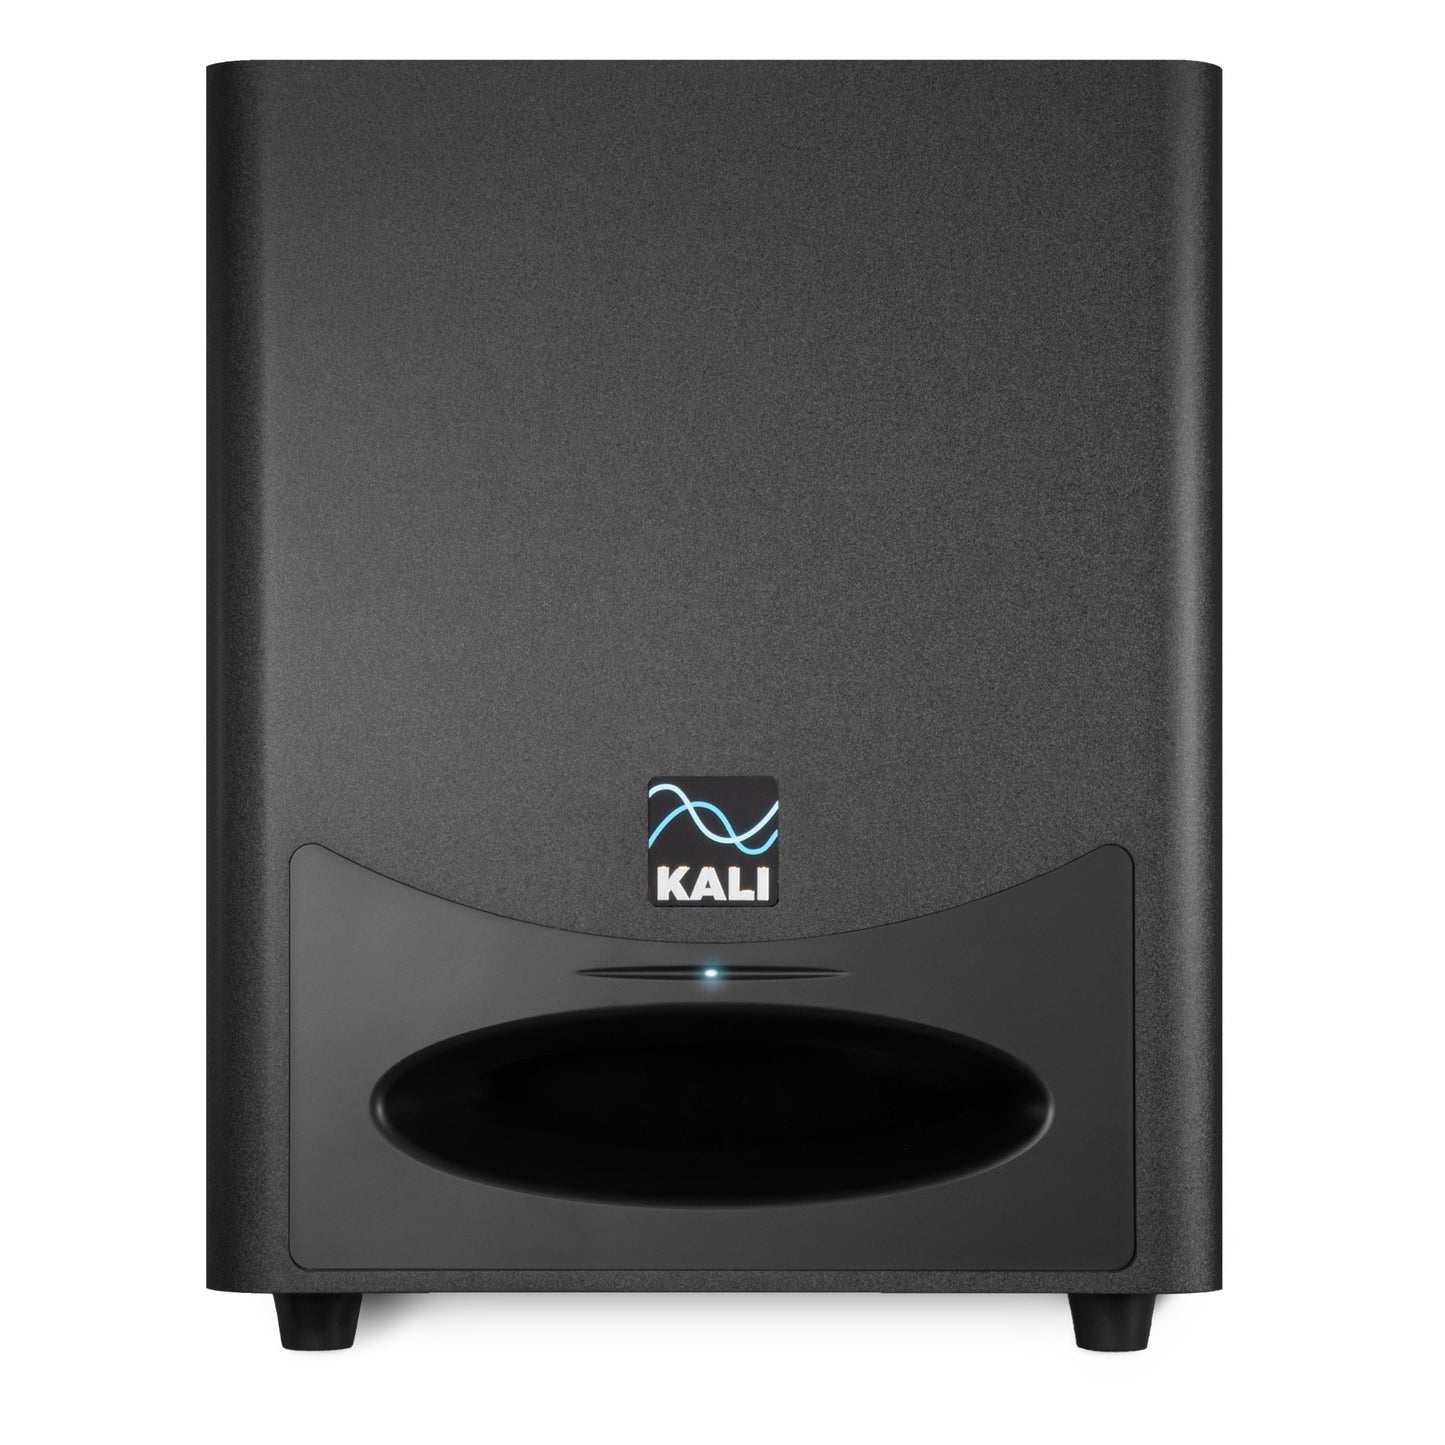 KALI AUDIO IN-UNF Ultra Nearfield 3-way Studio Speakers - Professional Monitor Speakers for Audio Production, Mixing, Mastering - Boundary EQ, DSP-Powered DIP Switches - Recording Studio Equipment